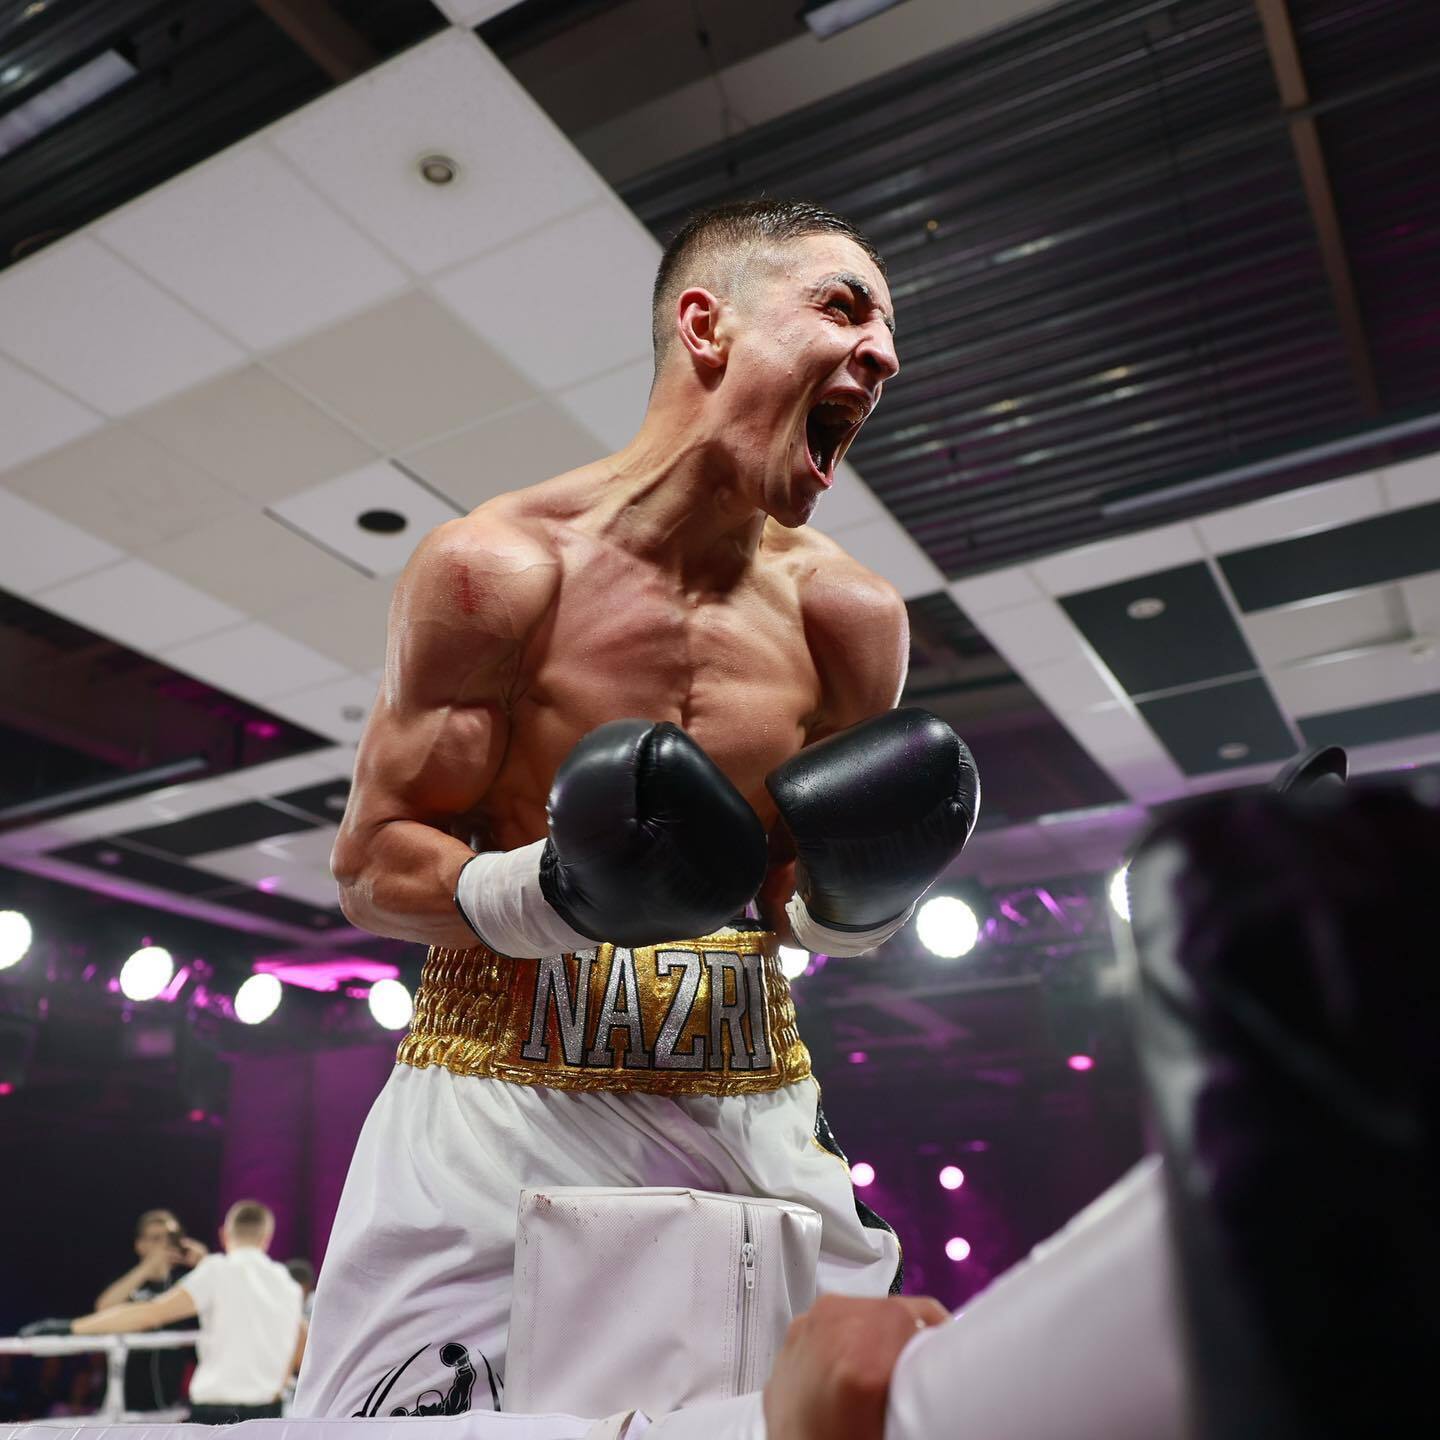 He struck from behind. Ukrainian boxer wins world title by scandalous knockout